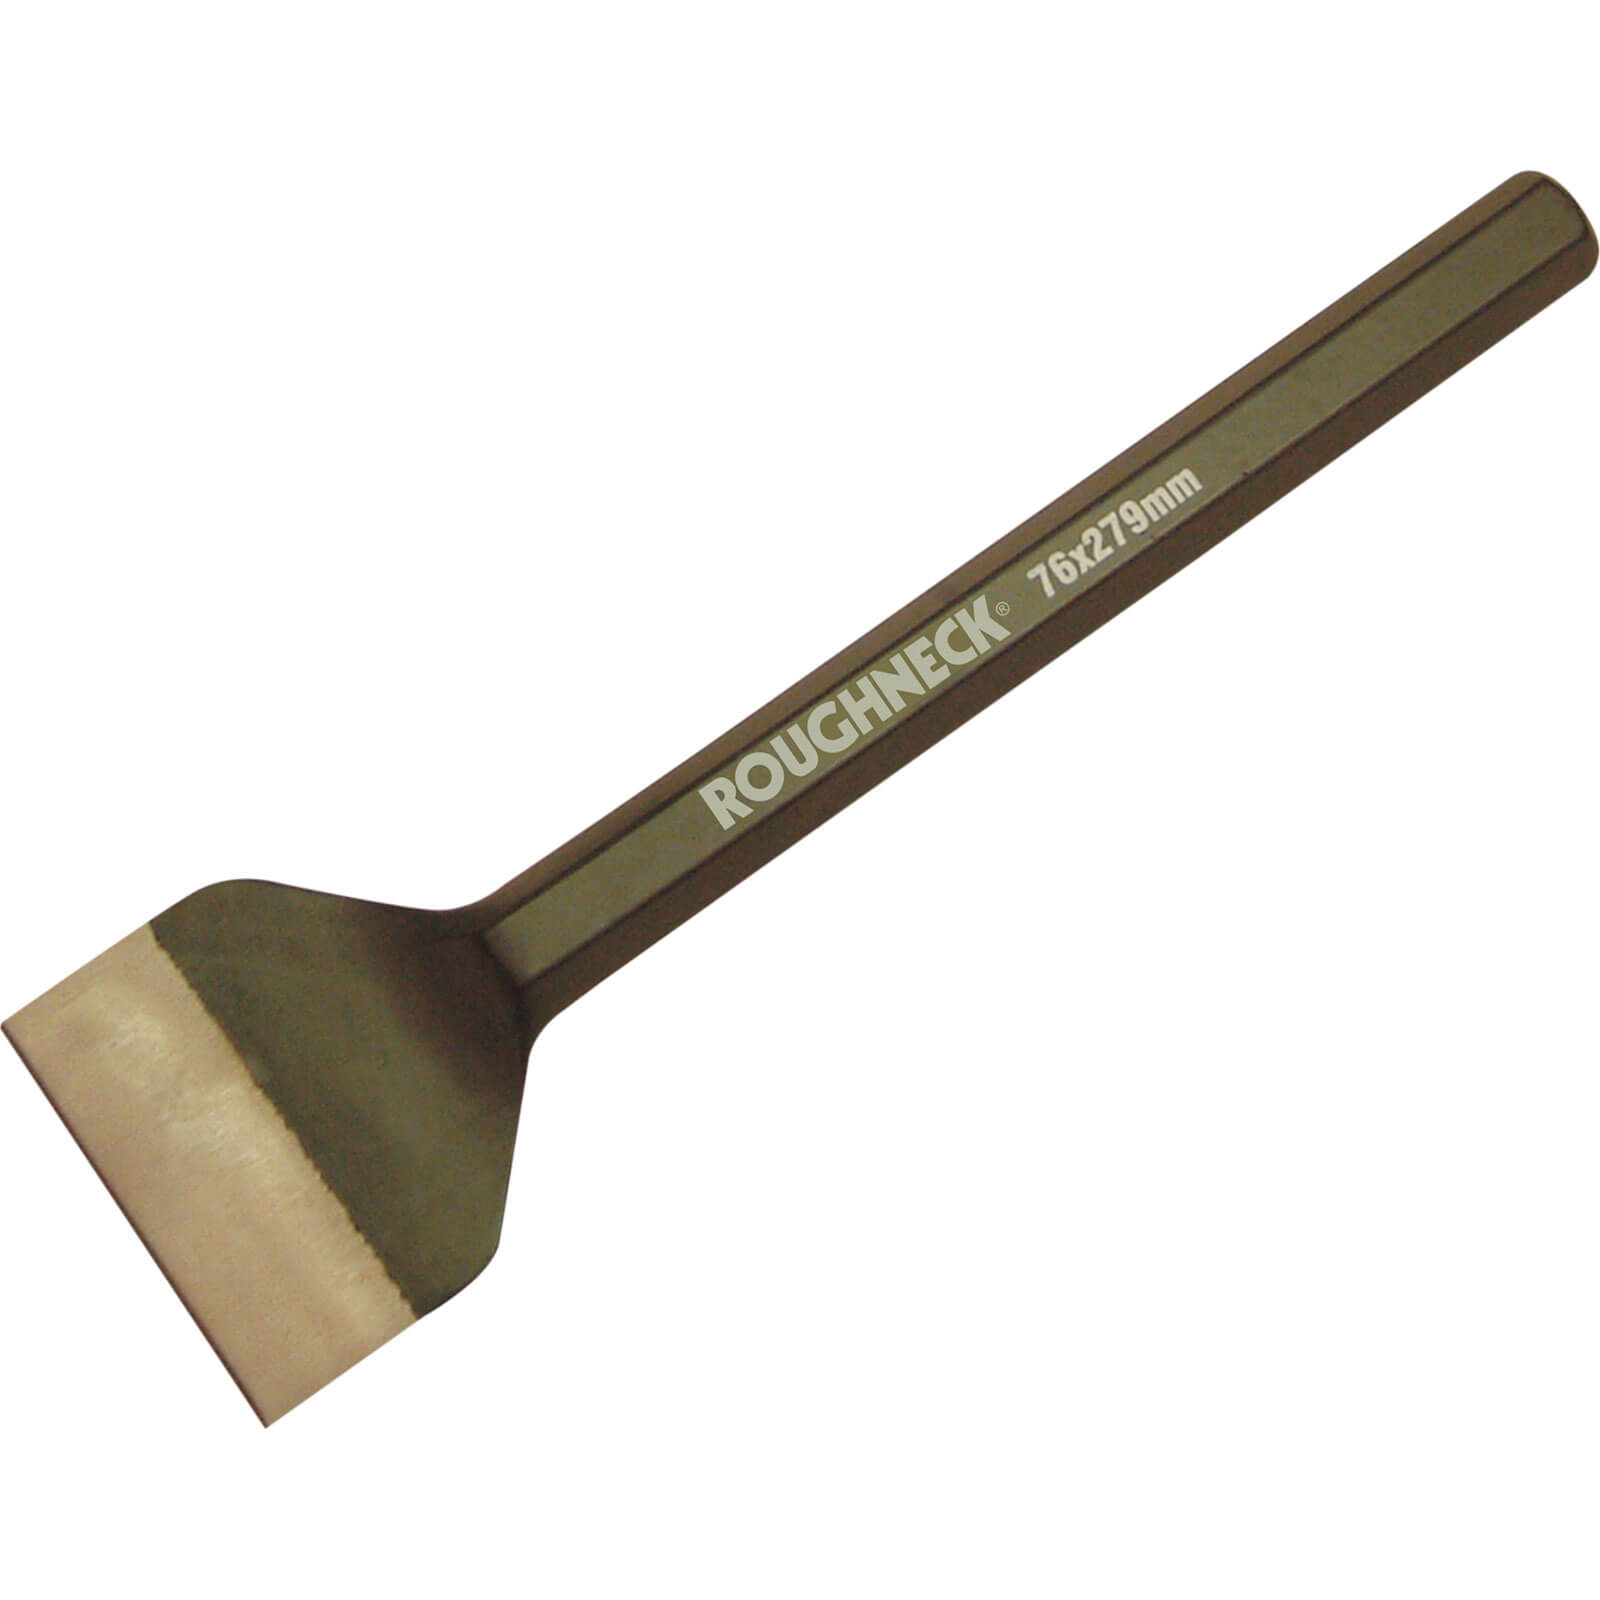 Roughneck Electricians Flooring Chisel 76mm x 279mm